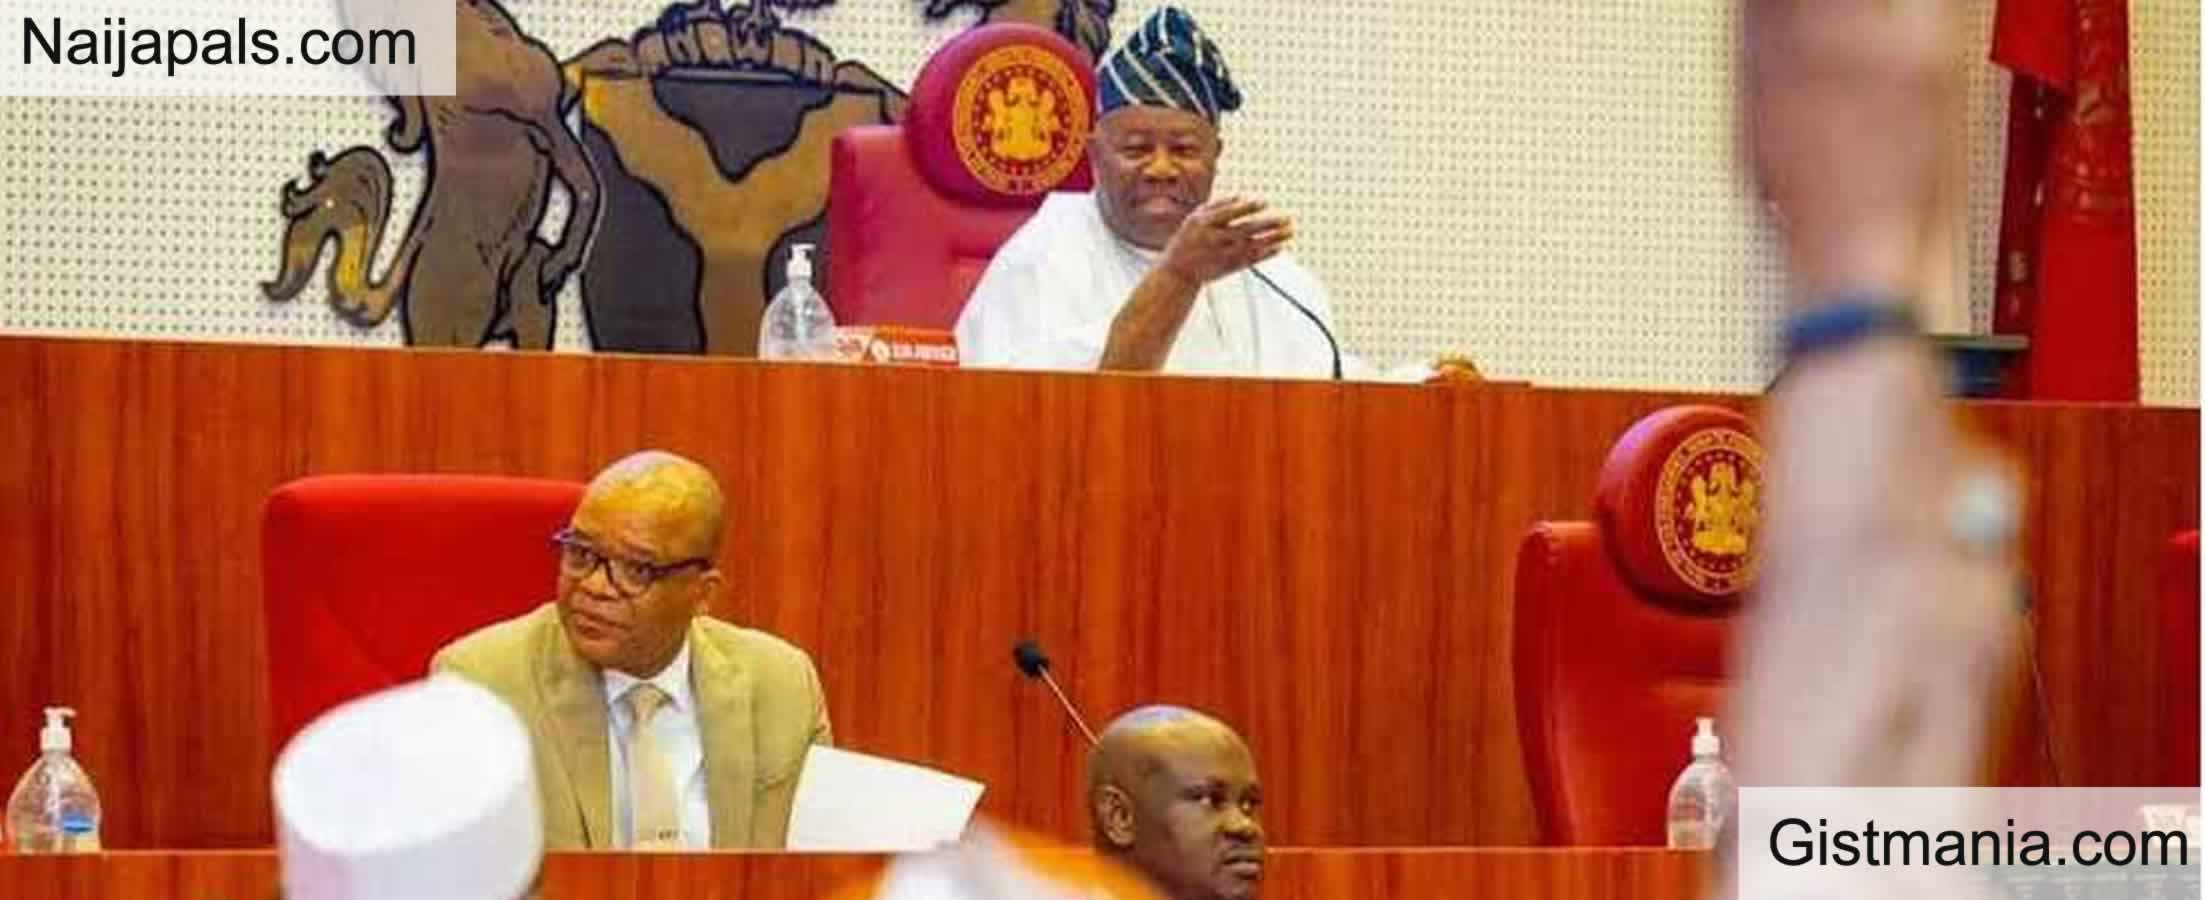 Akpabio Reveals Plan To Build Ultra-Modern Hospital For Lawmakers, Lists Achievements Of 10th Senate